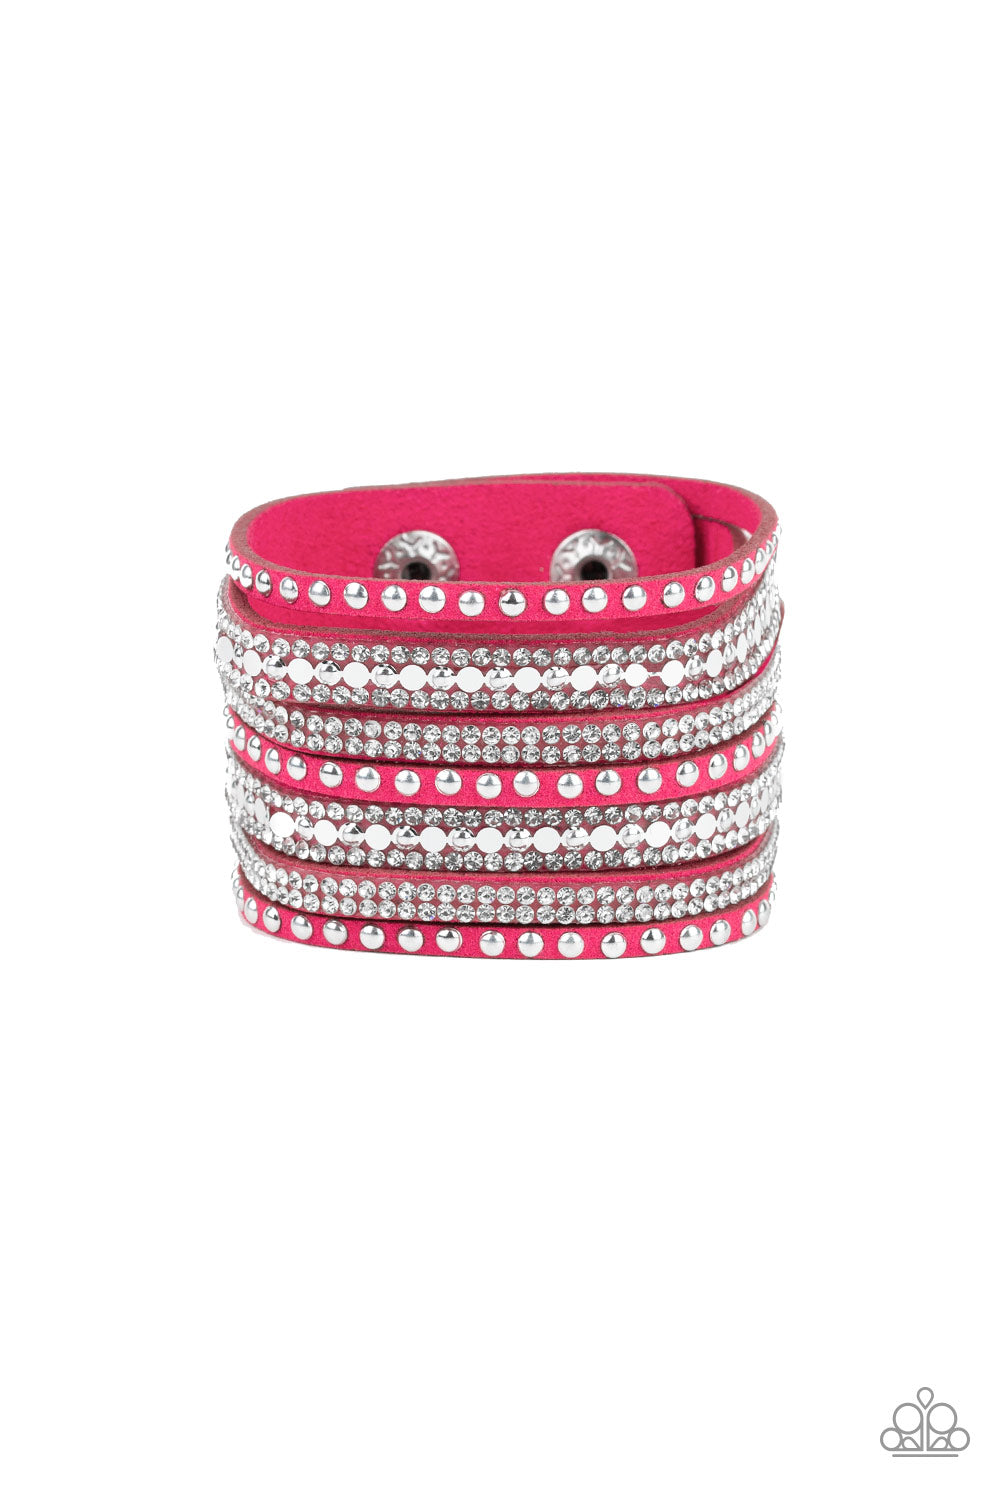 A thick pink suede band has been spliced into glittery strands encrusted in a collection of dainty silver studs, glittery white rhinestones, and flat silver sequins for a sassy look. Features an adjustable snap closure